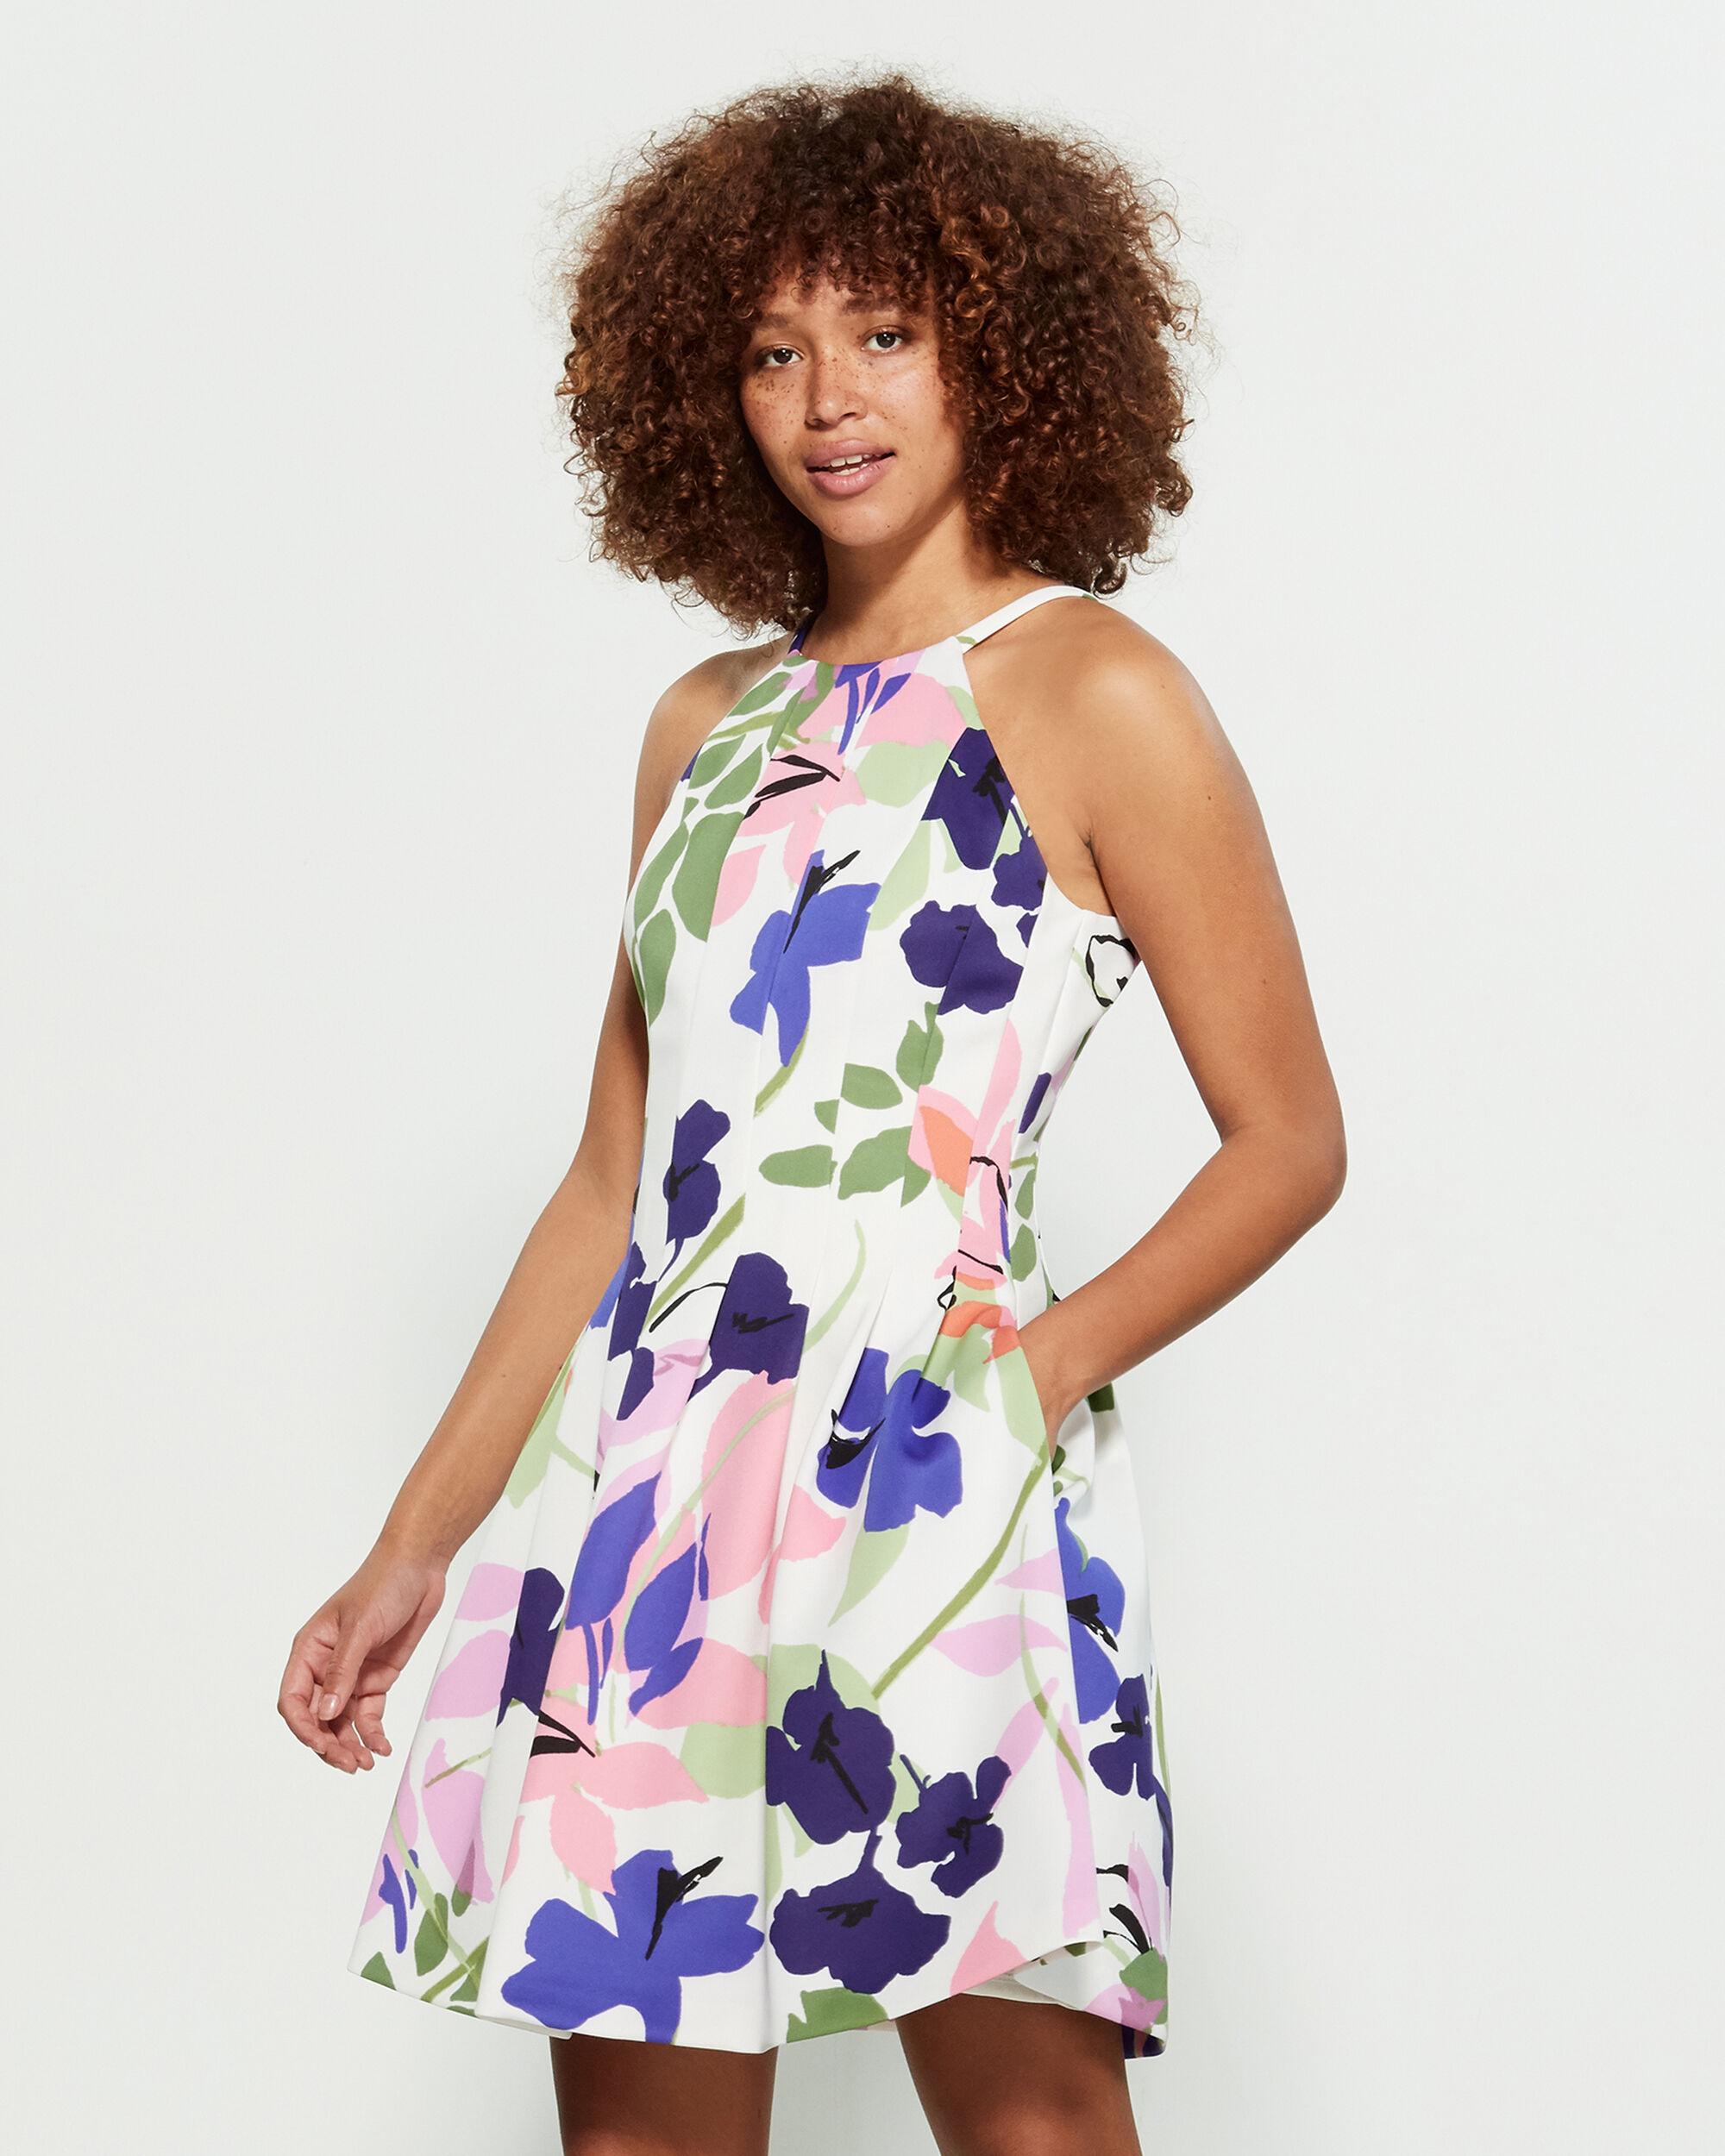 Vince Camuto Synthetic Floral Print Sleeveless Fit And Flare Dress Lyst 